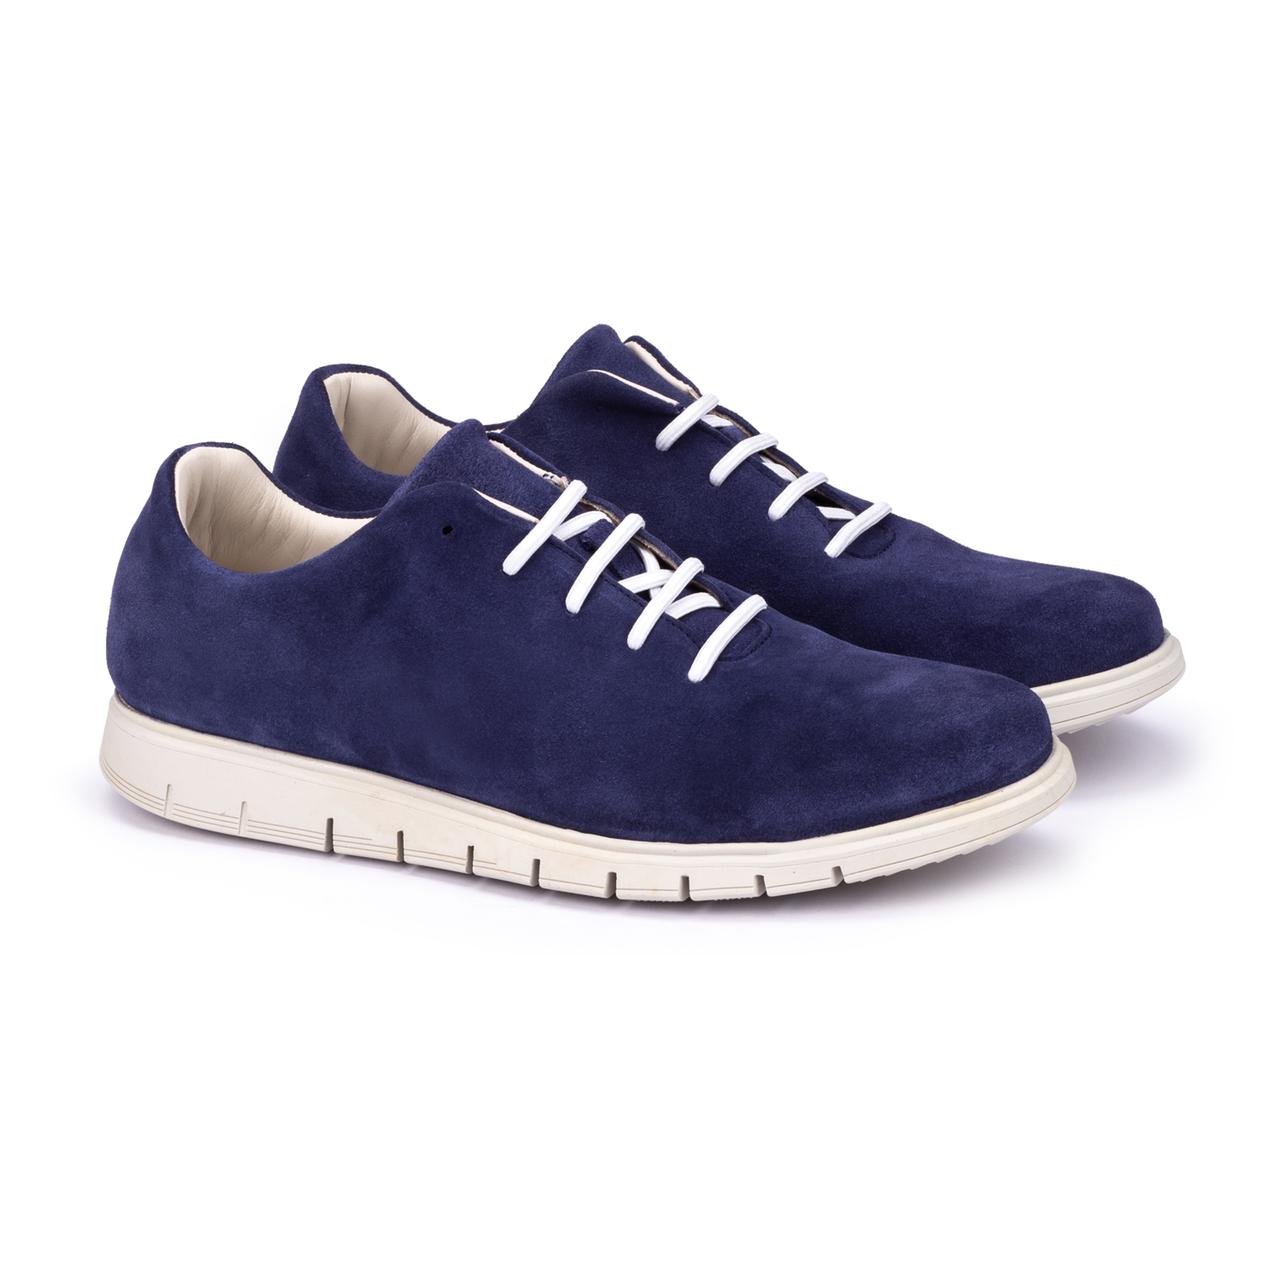 Neqwa Mens Sneakers Malaga - Navy Suede Leather